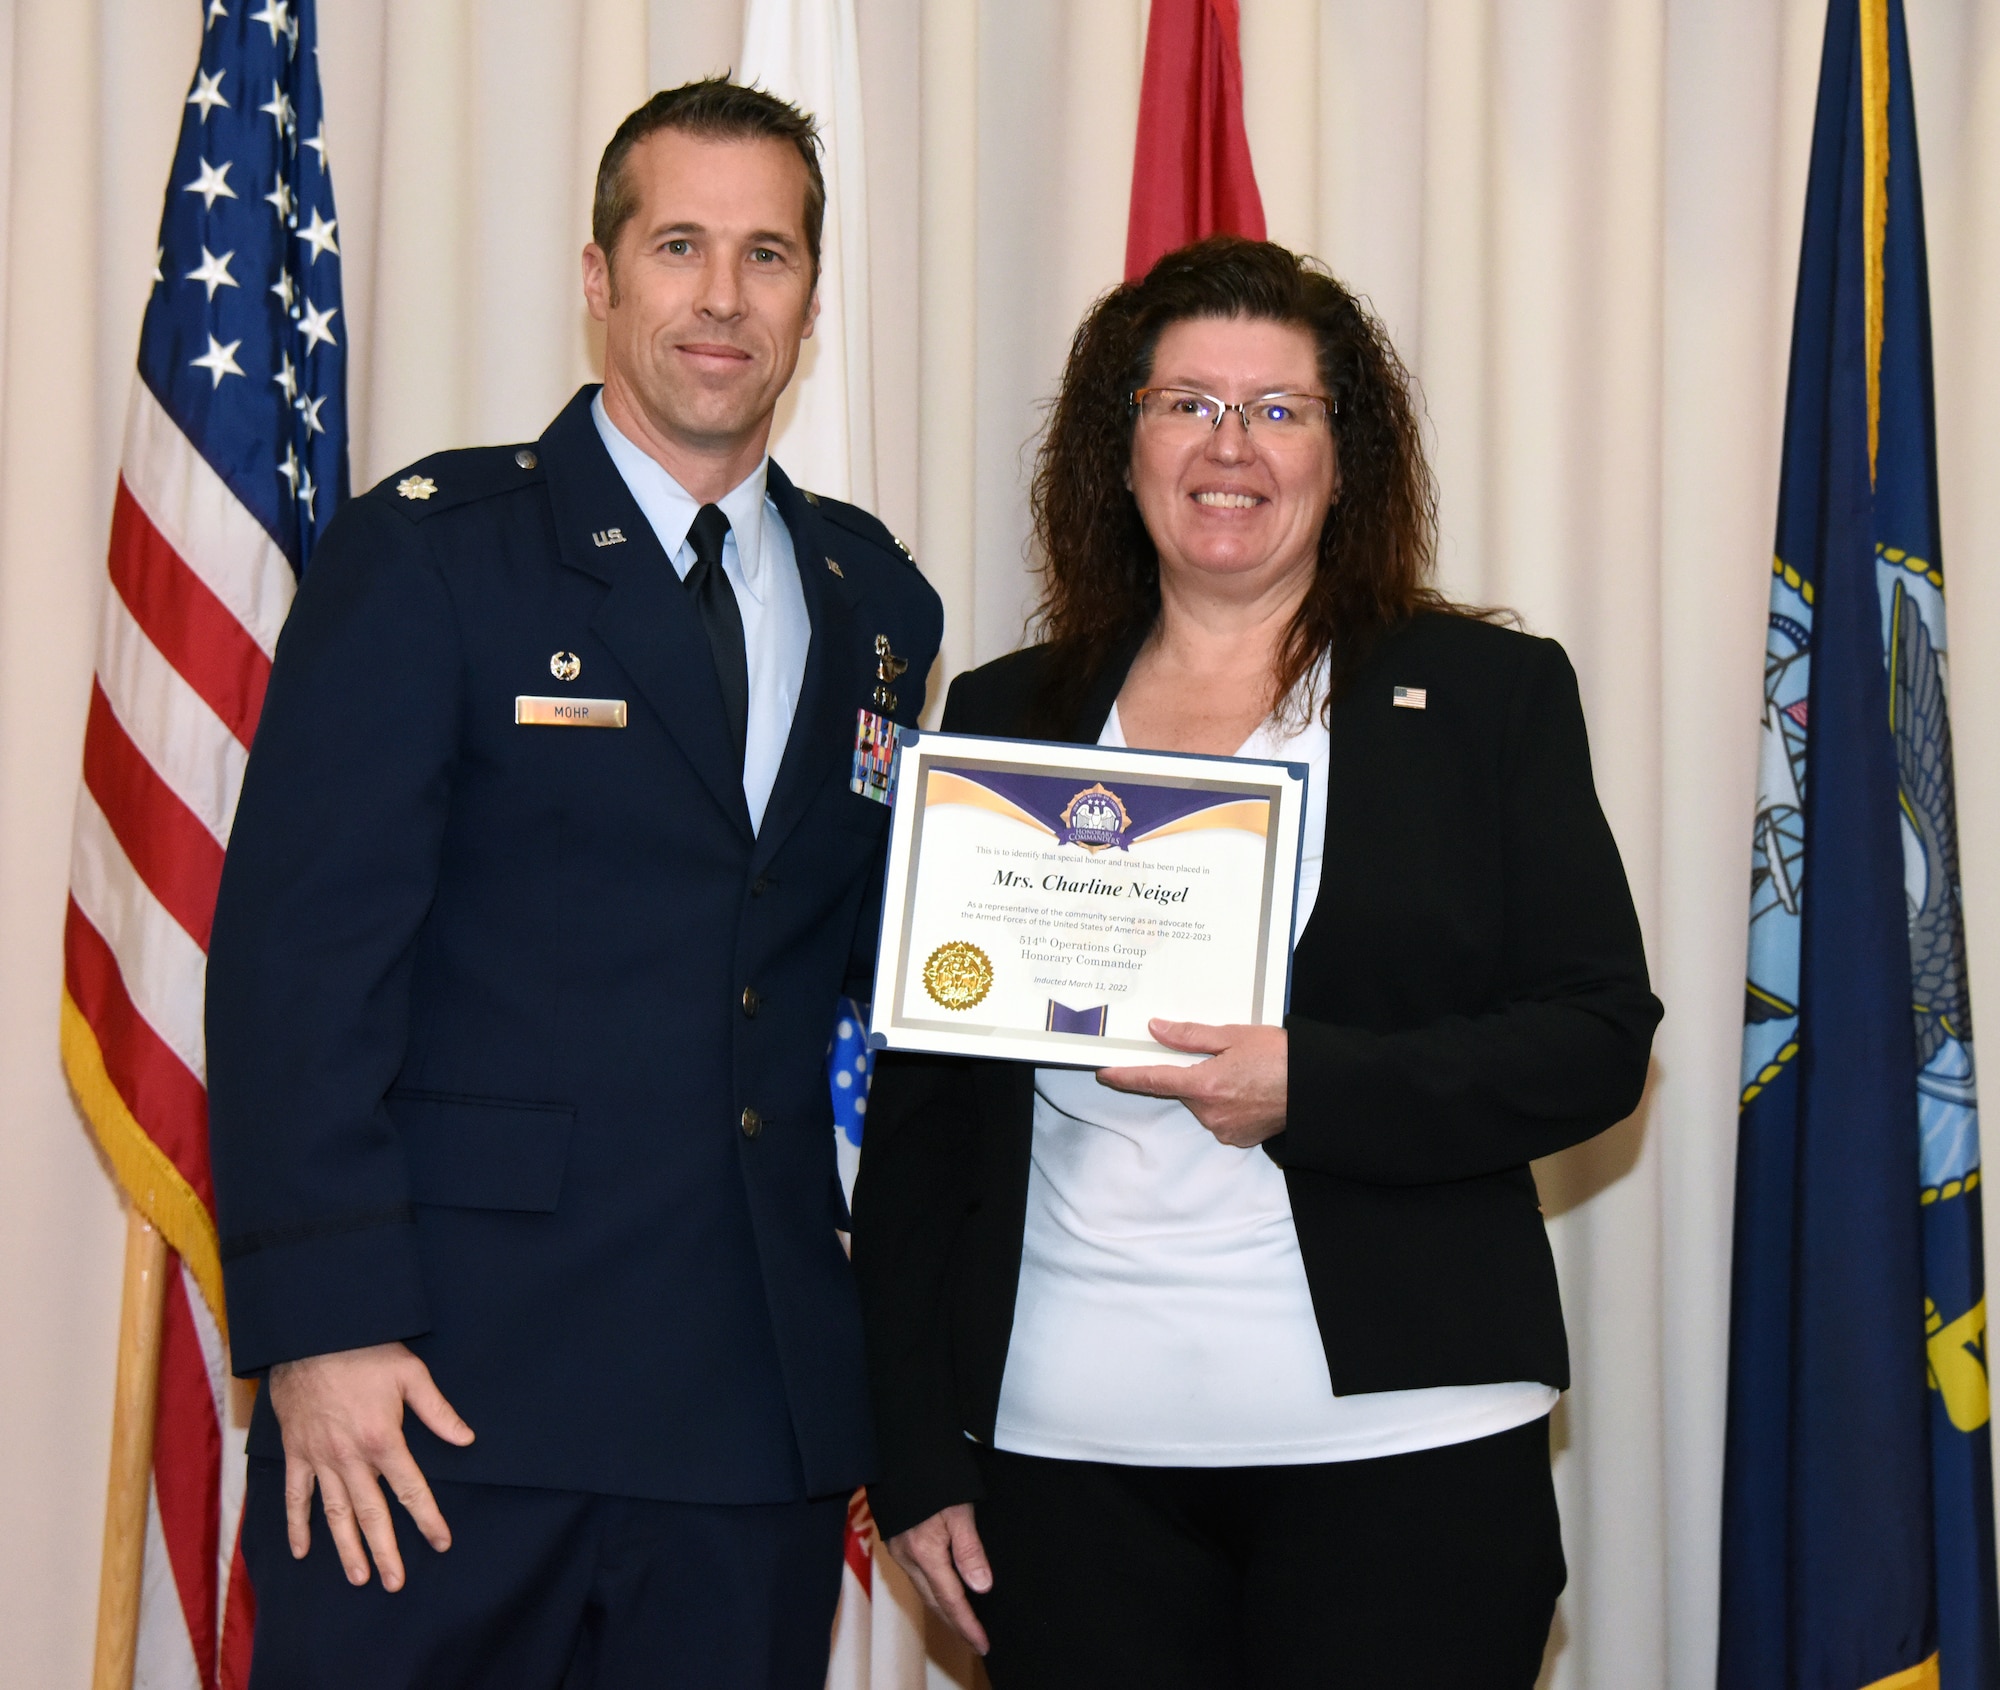 Leaders from the 514th Air Mobility Wing, join inductees, into the Honorary Commander Program at Joint Base McGuire-Dix-Lakehurst, N.J., March 11, 2022.